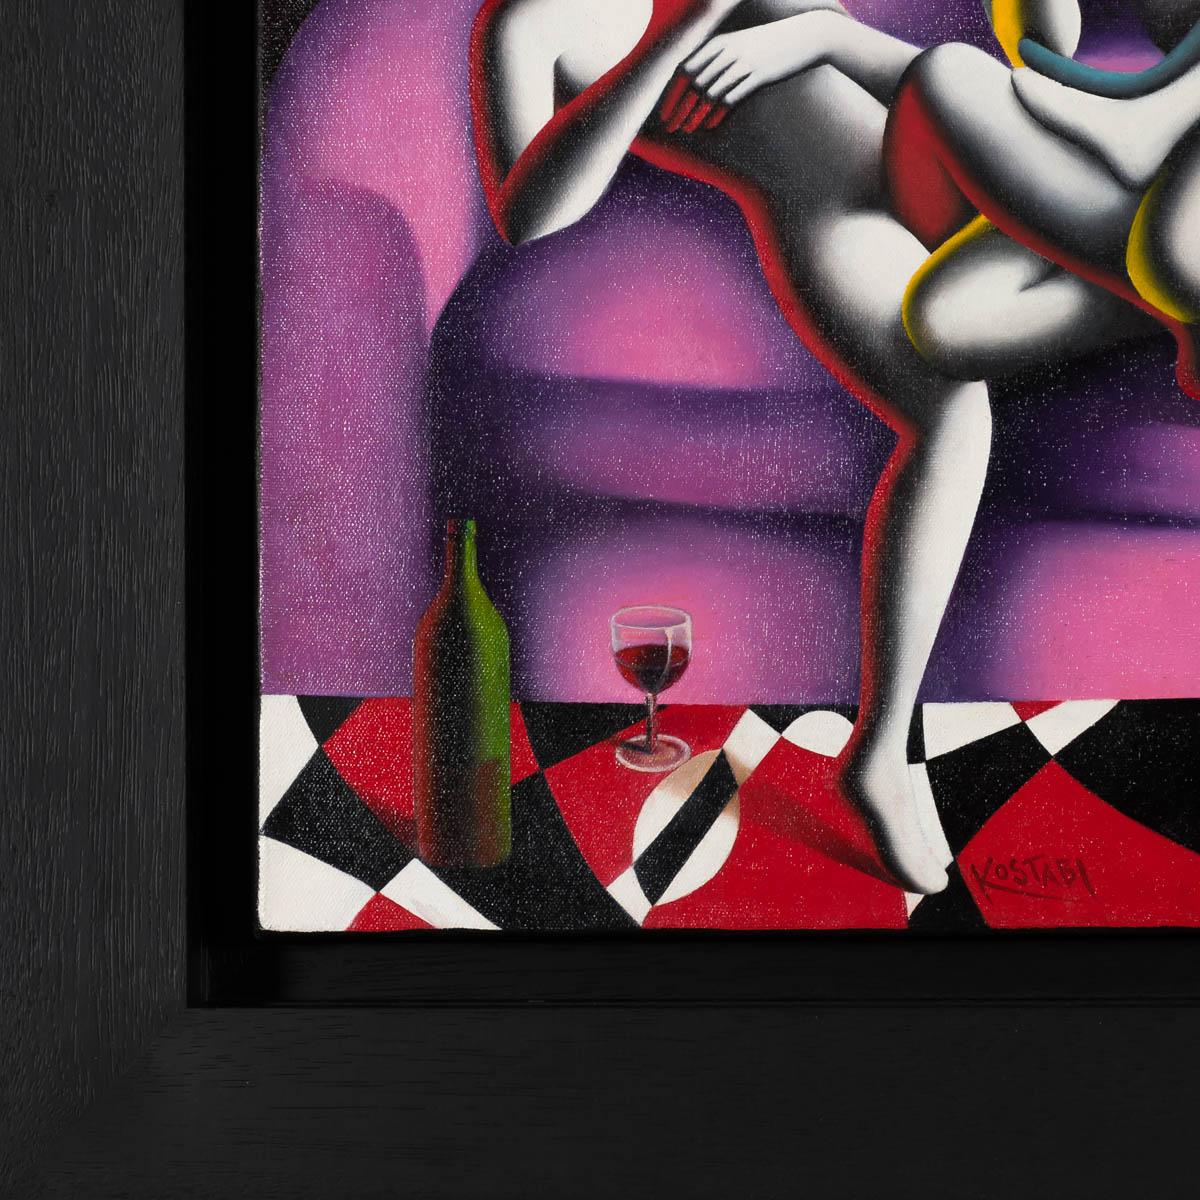 Three Graces is an oil on canvas painting, 17.75 x 23.75 inches, signed and dated 'KOSTABI 2019' lower center of image. Framed in a contemporary black frame.
